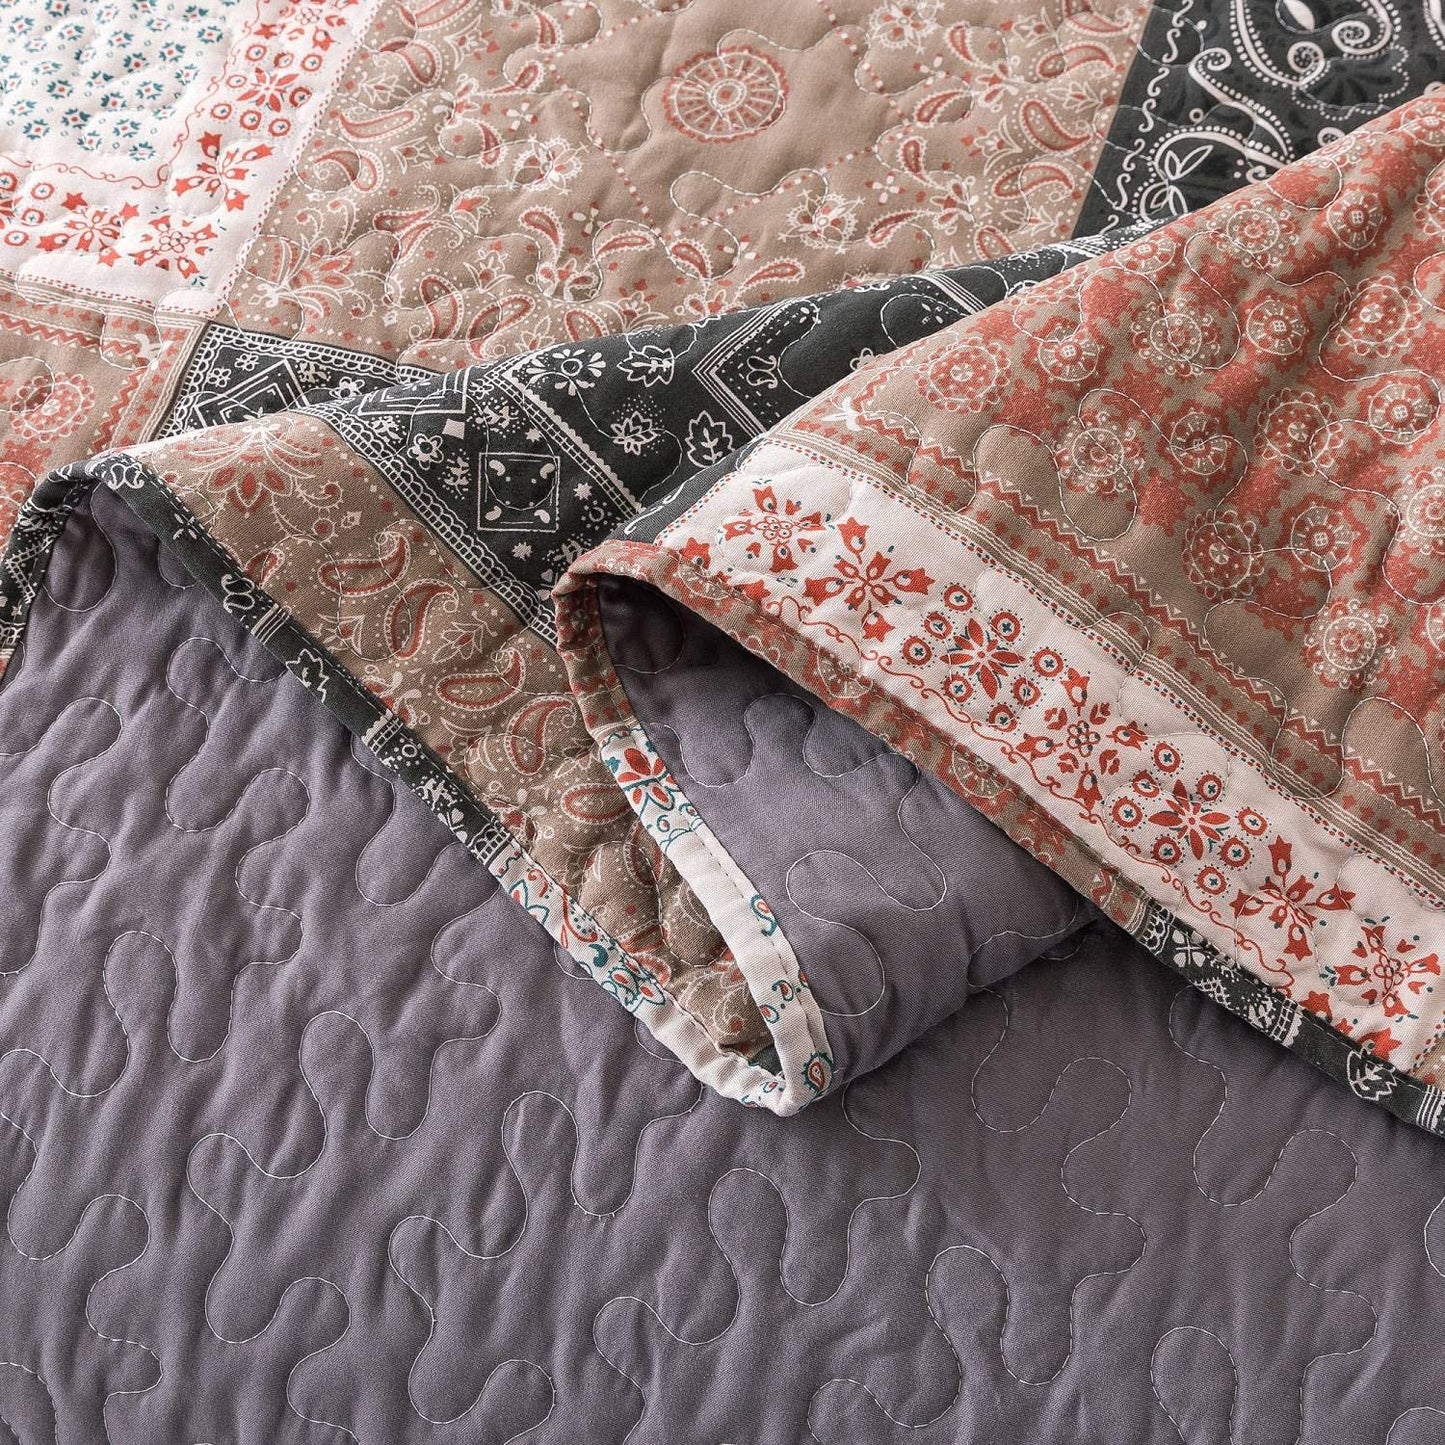 Microfiber Reversible Quilt, Sham in Paisley Floral Pattern